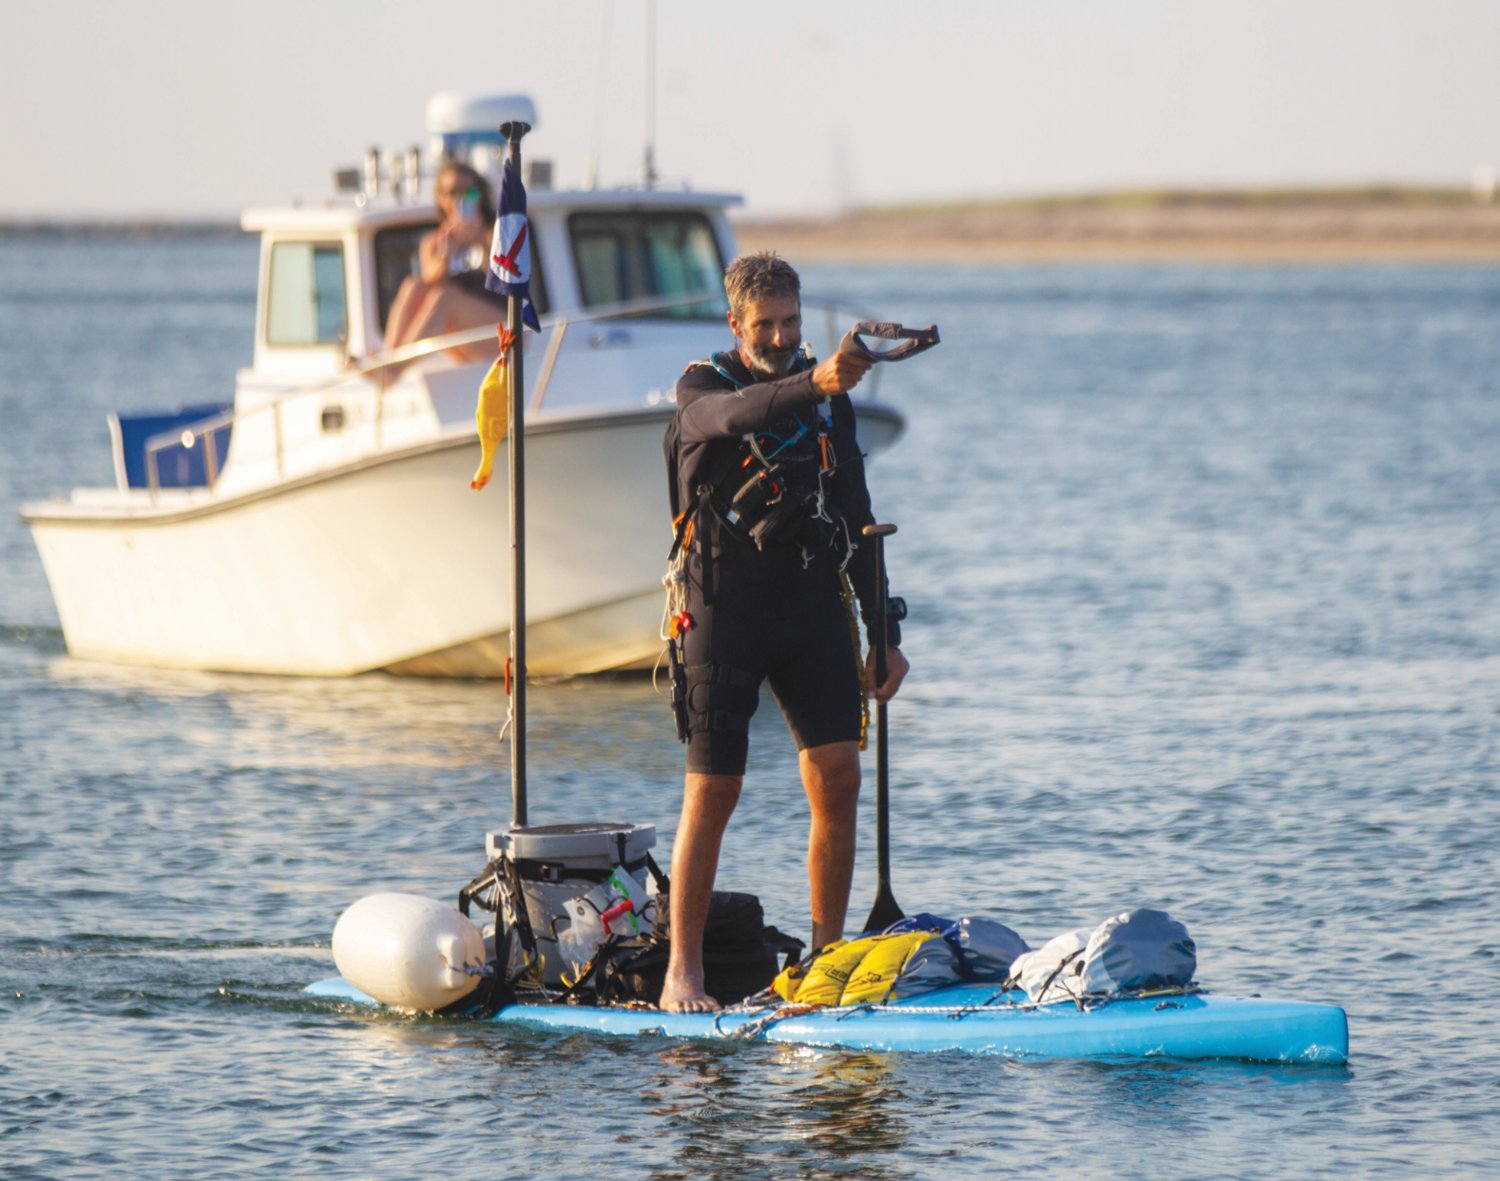 Paddle-boarder Adam Nagler approaches Brant Point Light on Nantucket early Tuesday evening, completing his 450-mile odyssey that began in southern Virginia.